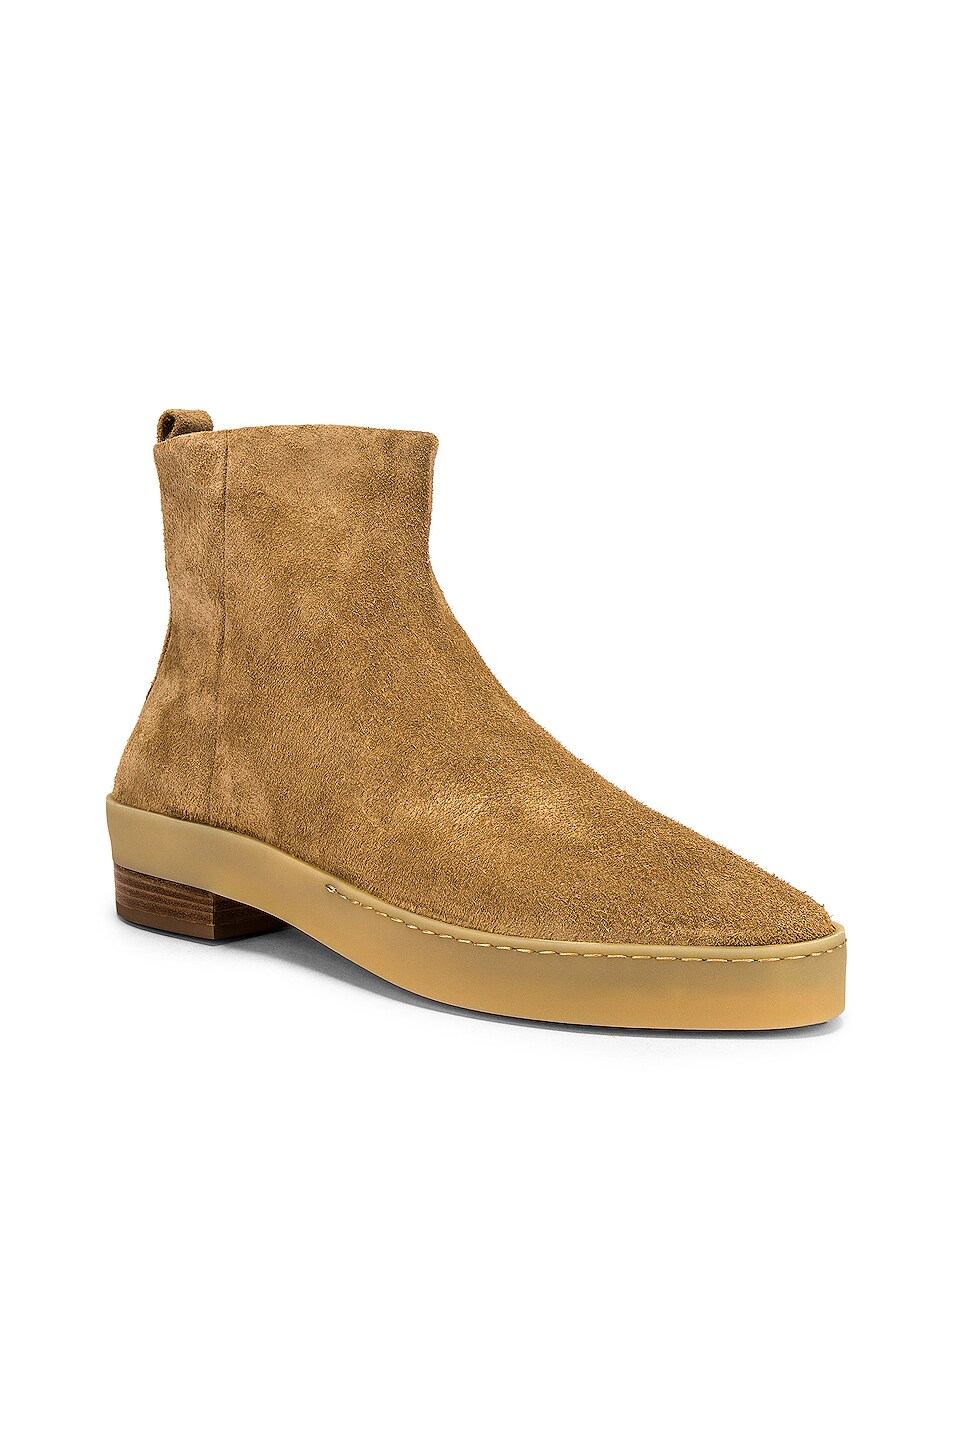 Image 1 of Fear of God Chelsea Santa Fe Boot in Calcare